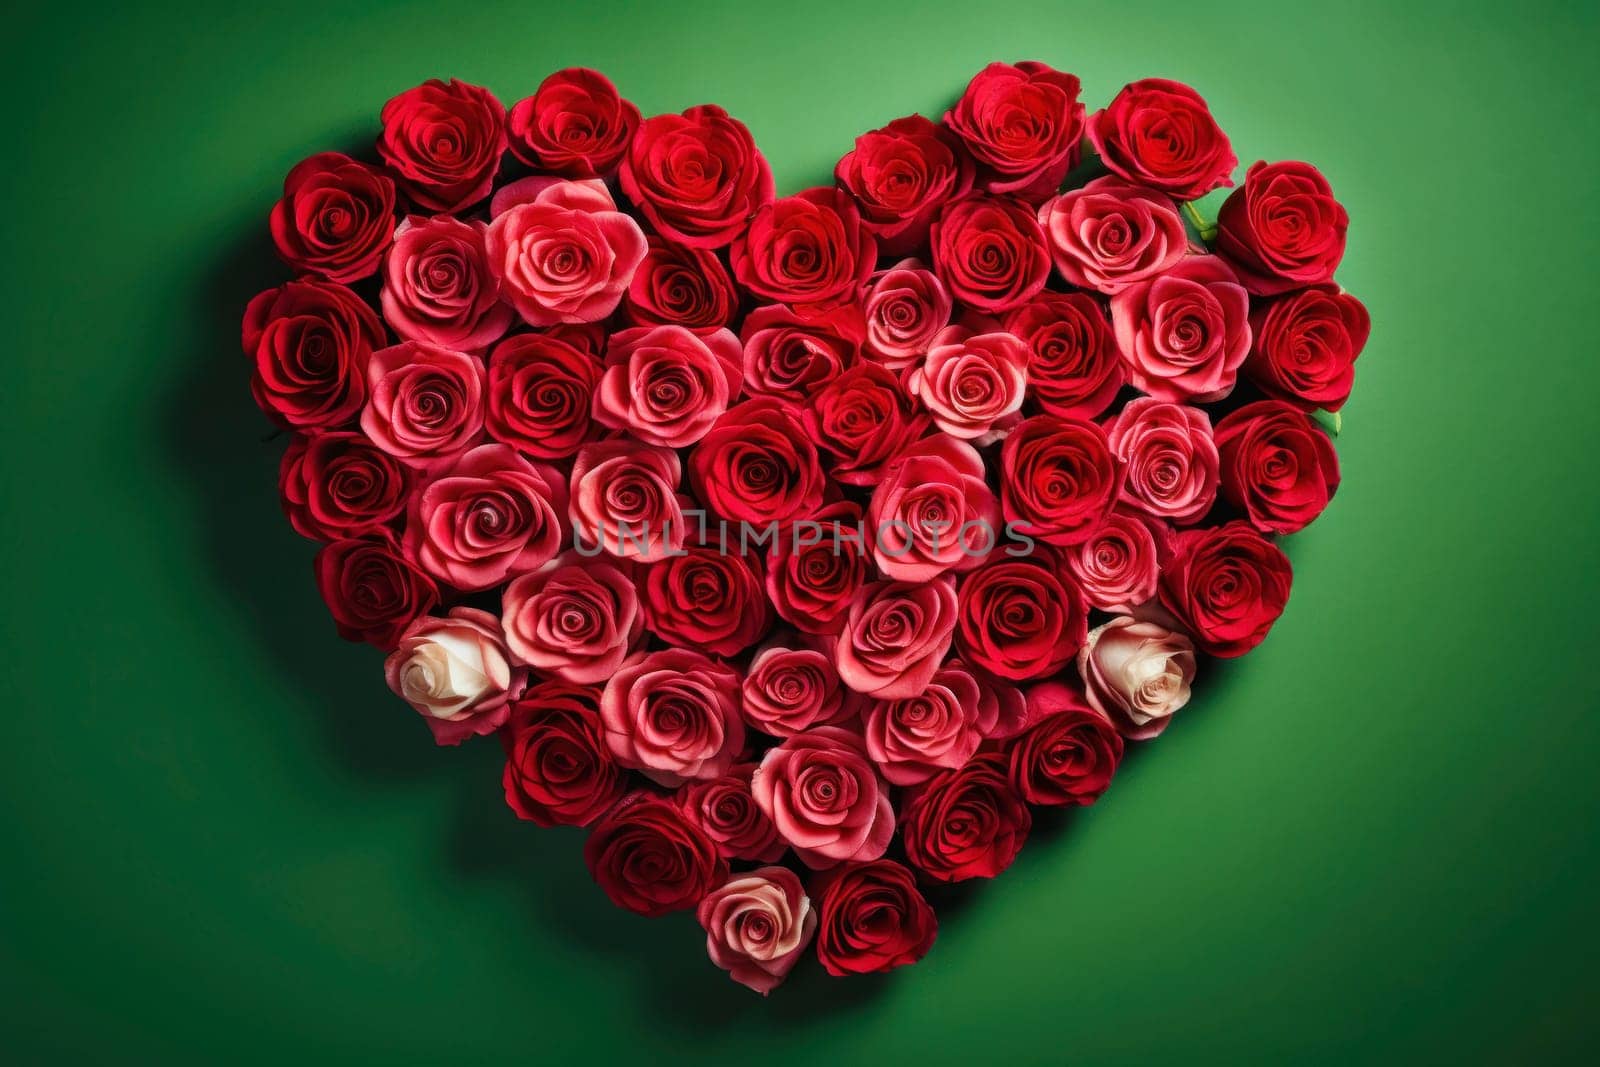 Rose flowers arranged in shape of heart, creating romantic floral masterpiece by andreyz